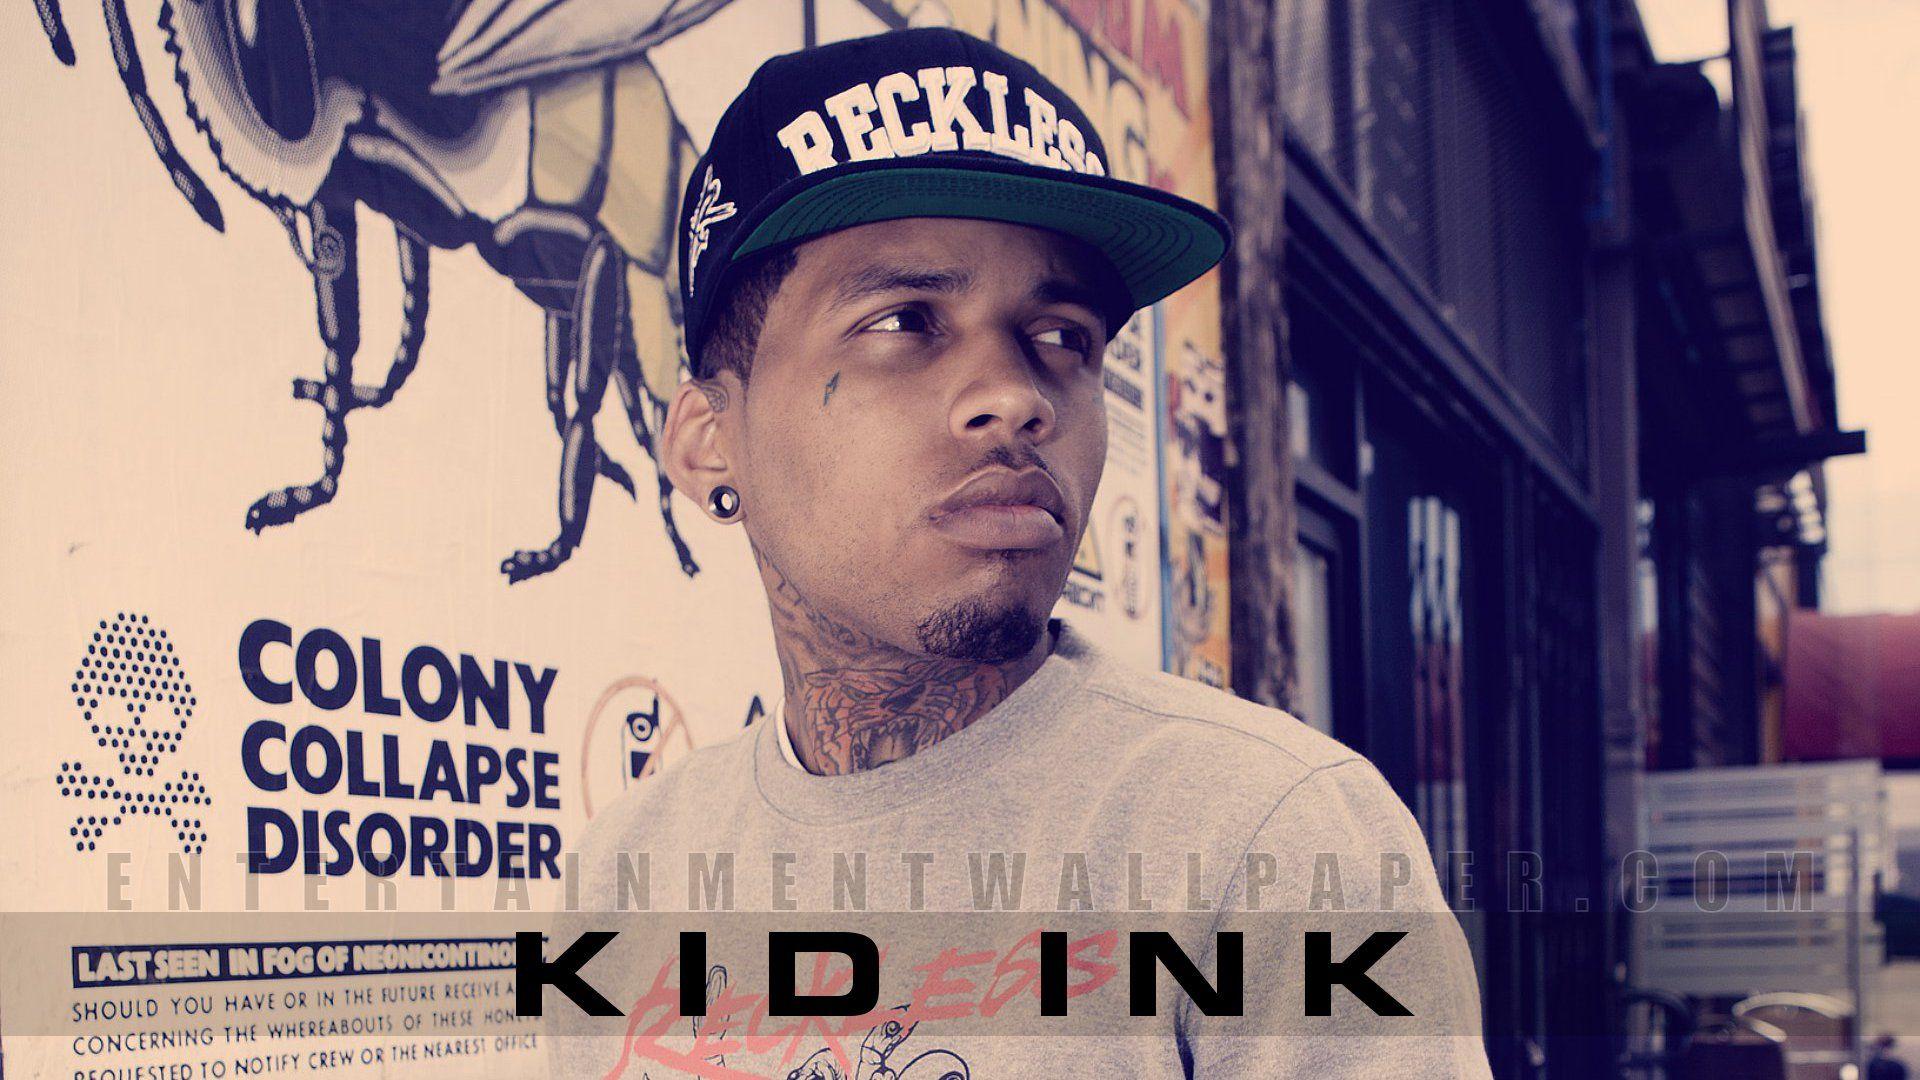 10 Fascinating Facts About Kid Ink - Facts.net